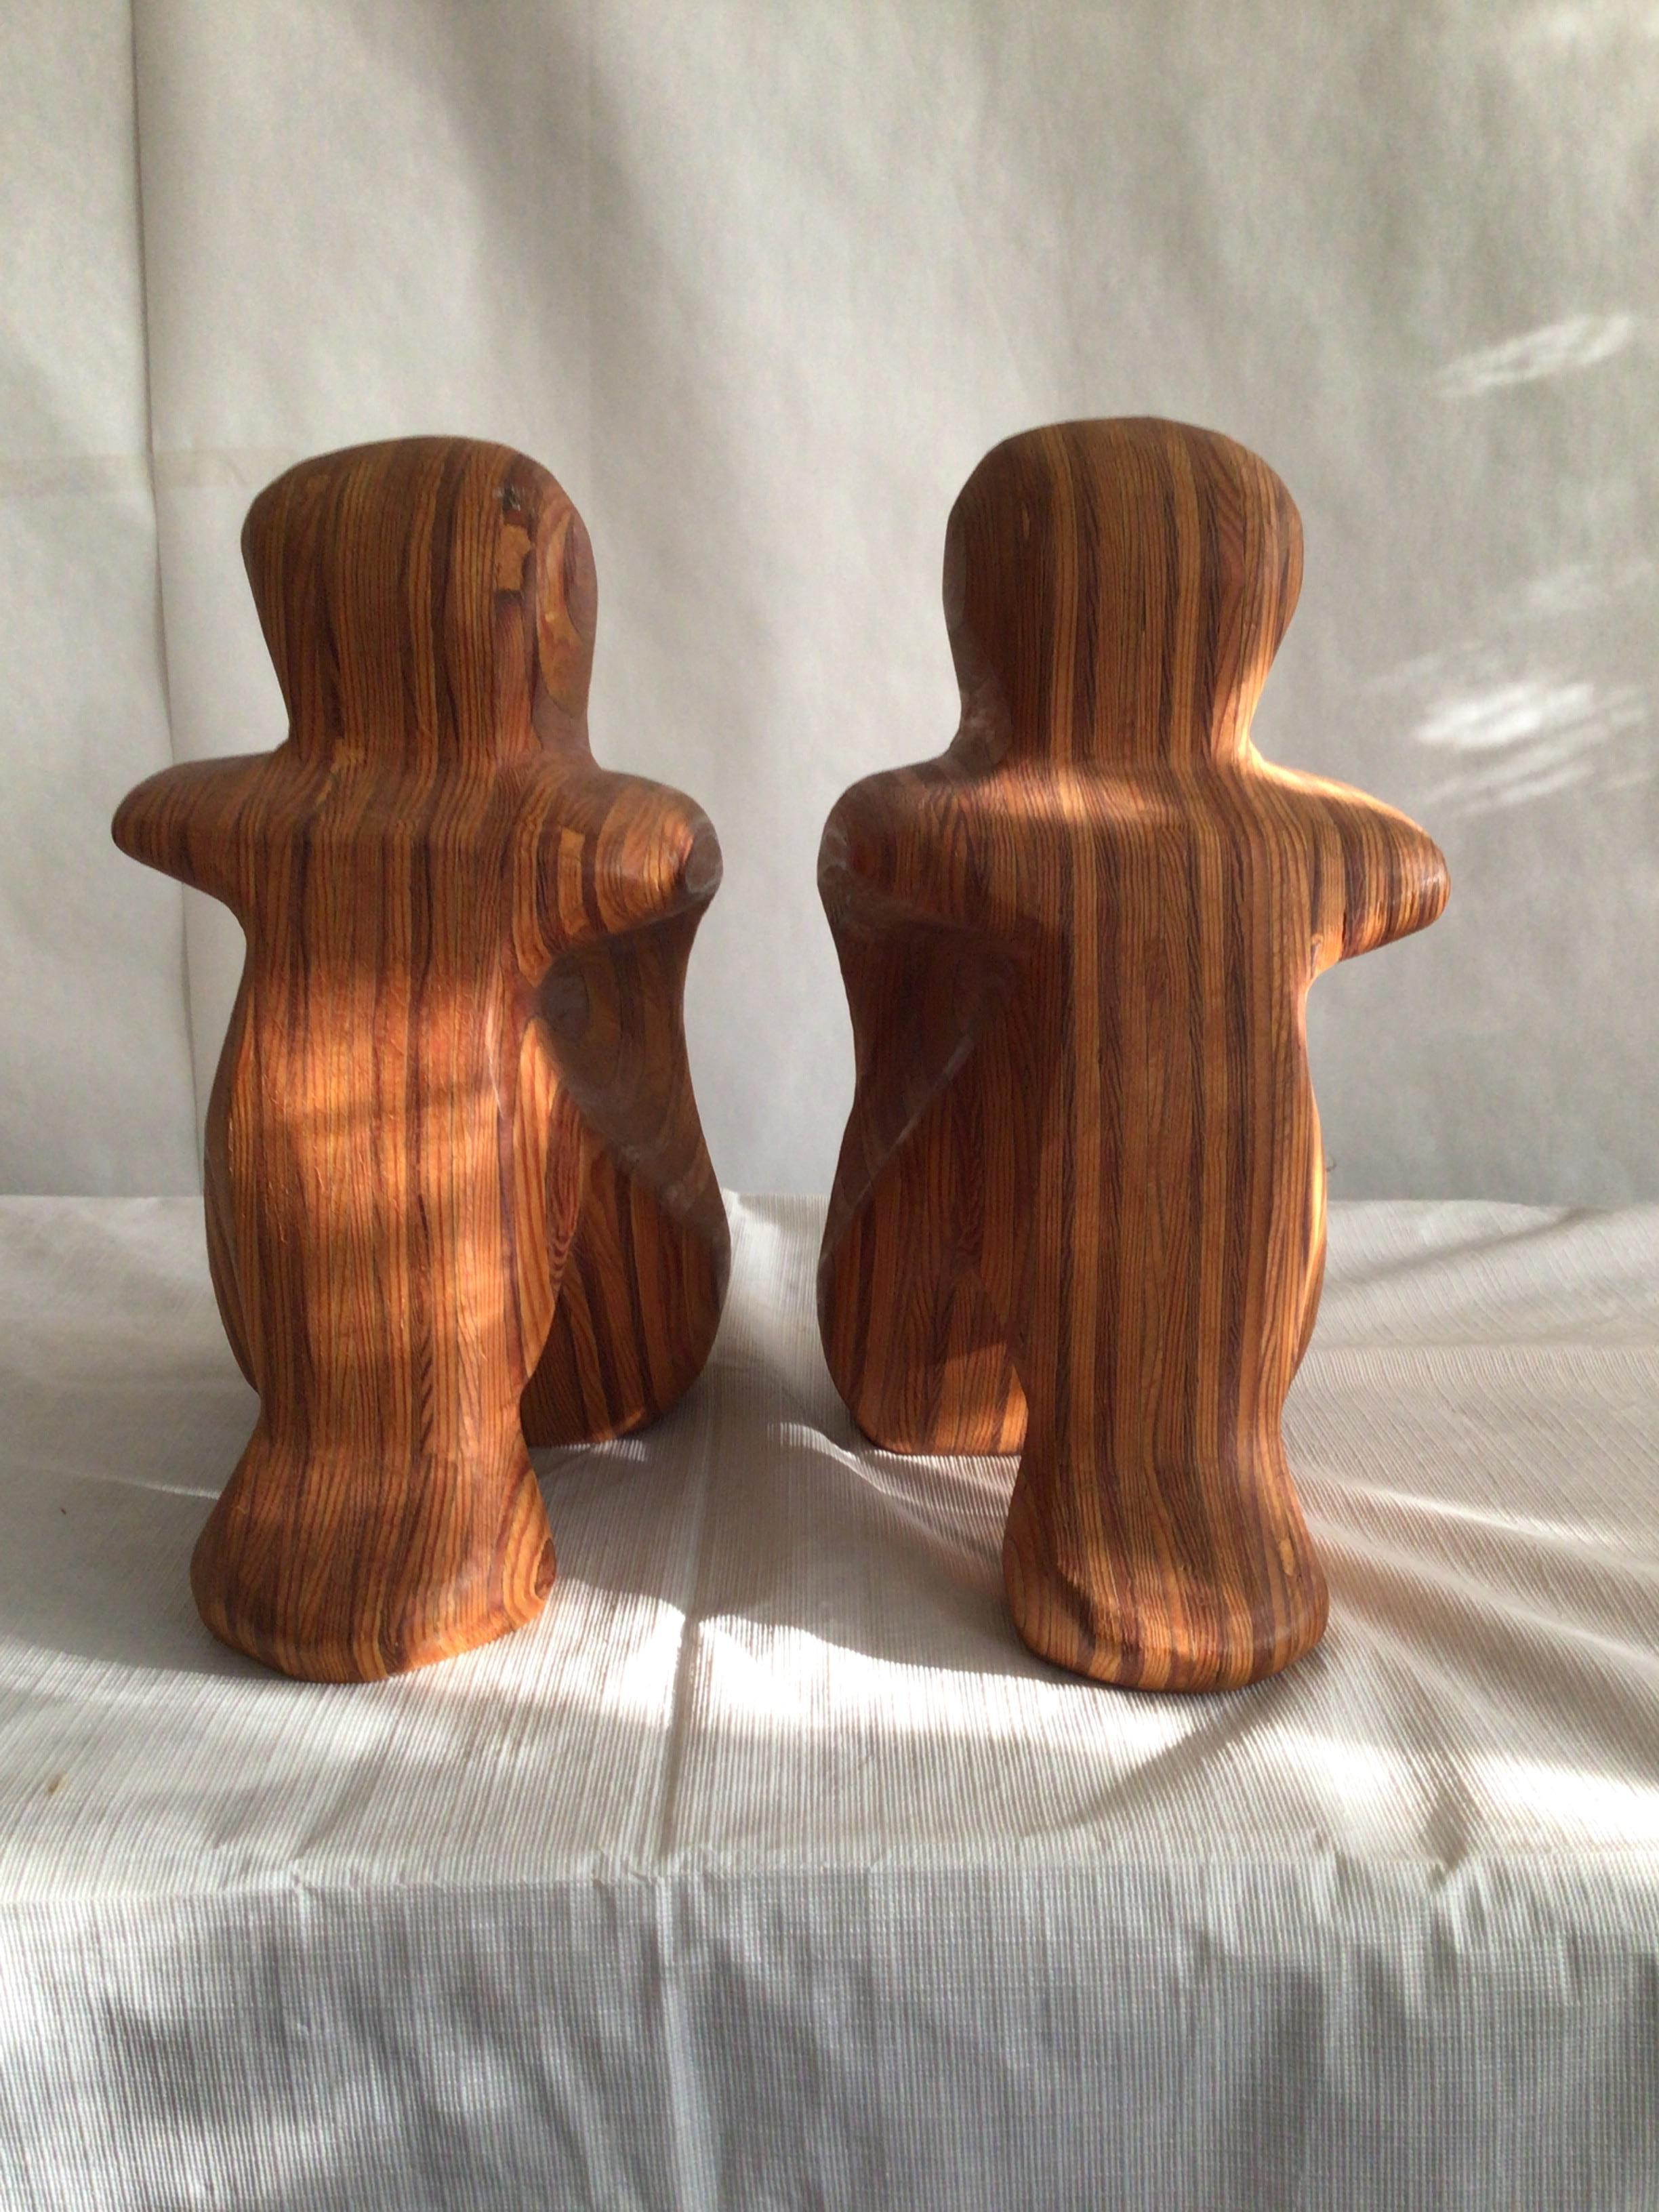 Carved 1980s Swirled Wood Sculptural Bookends For Sale